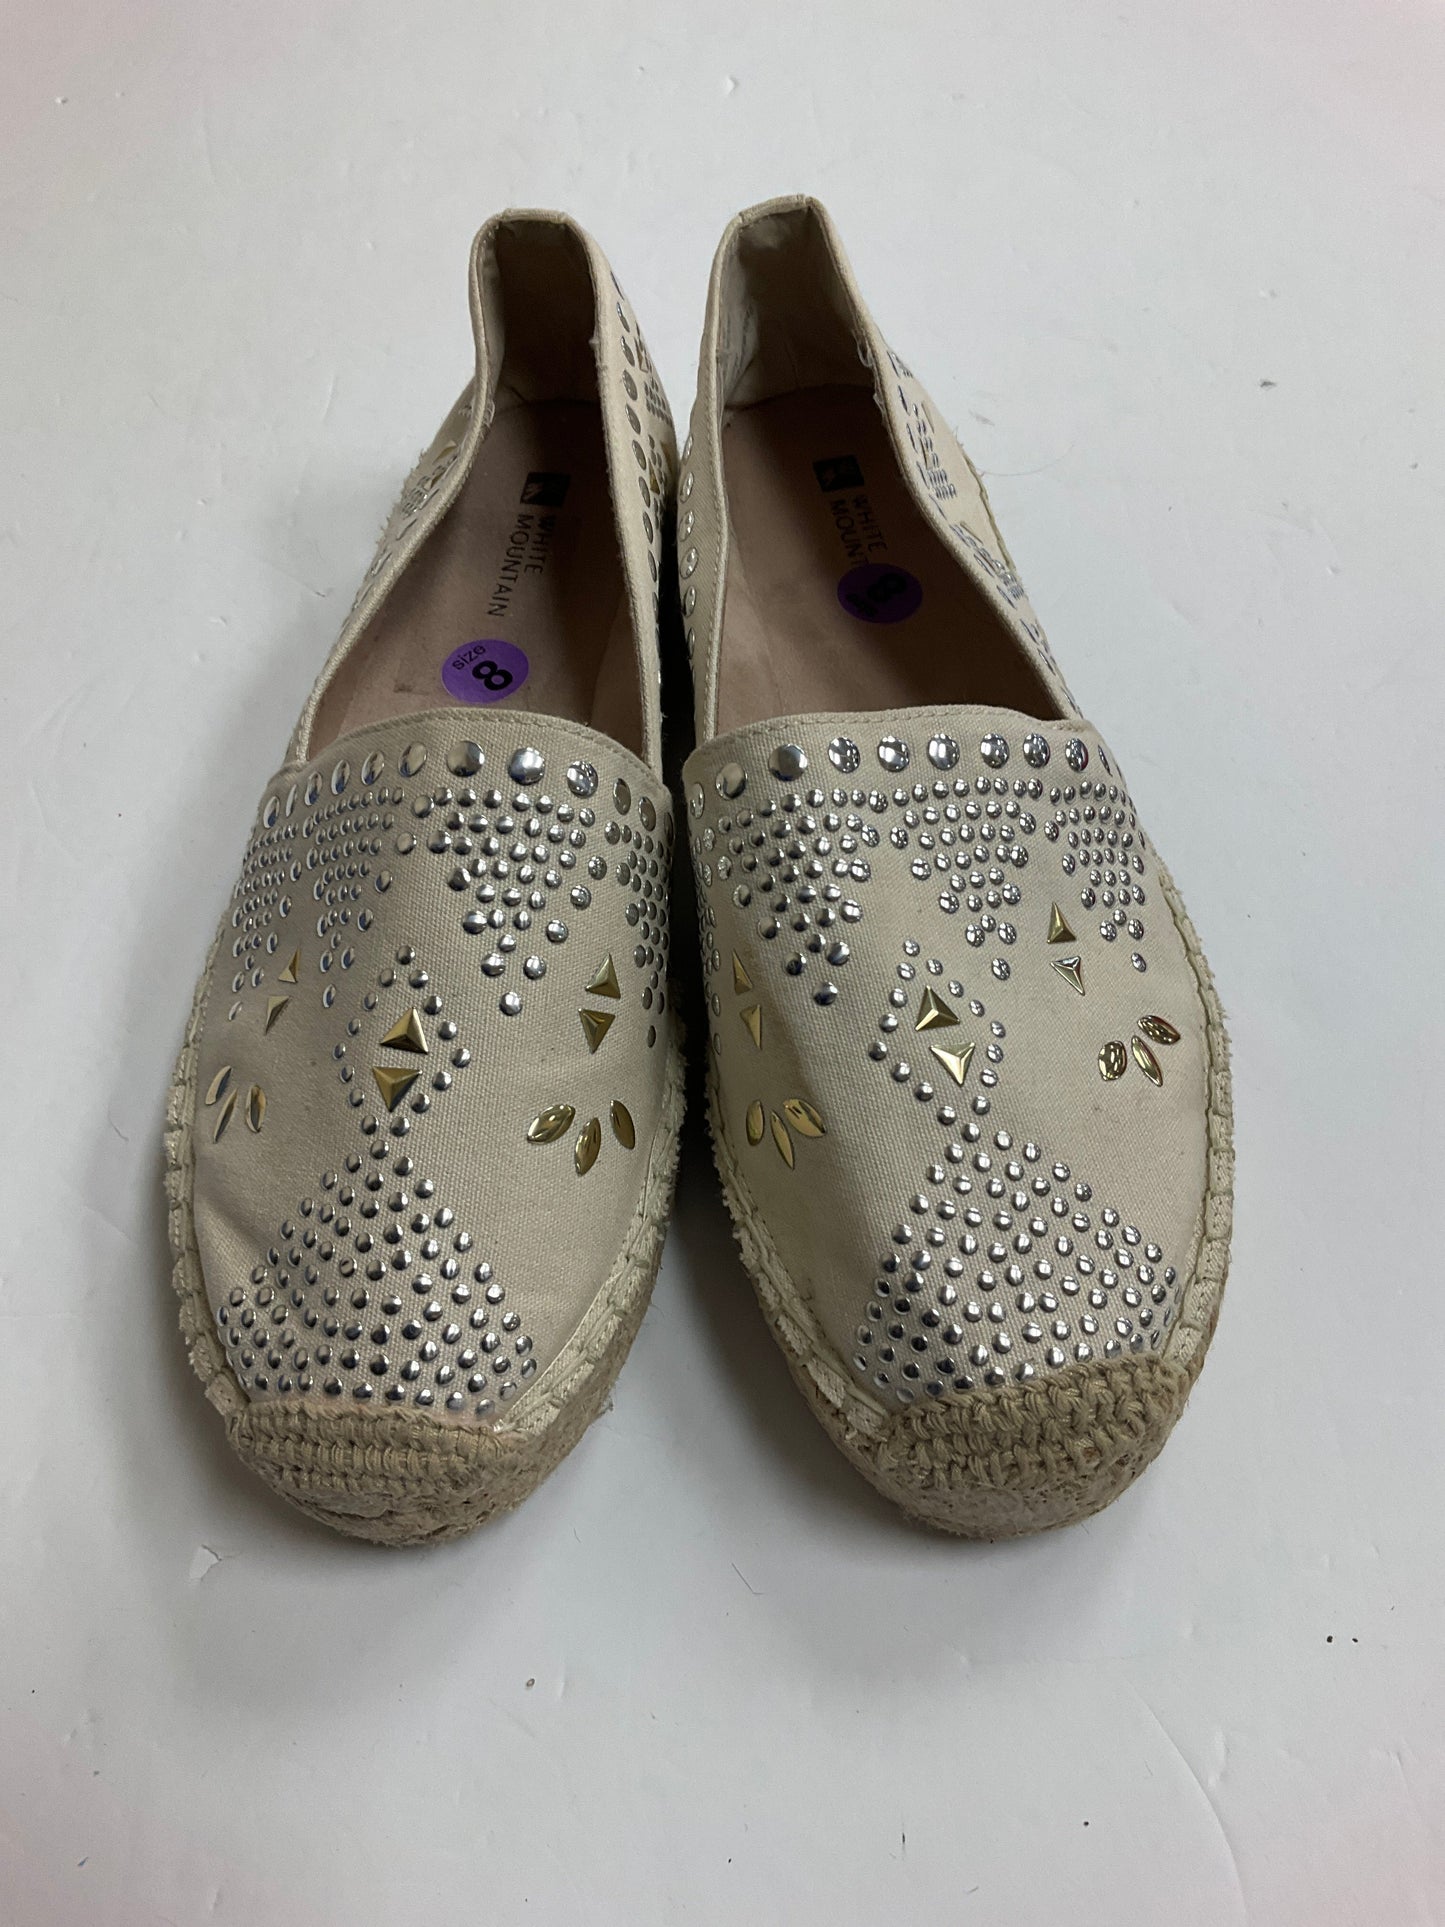 Shoes Flats Espadrille By White Mountain  Size: 8